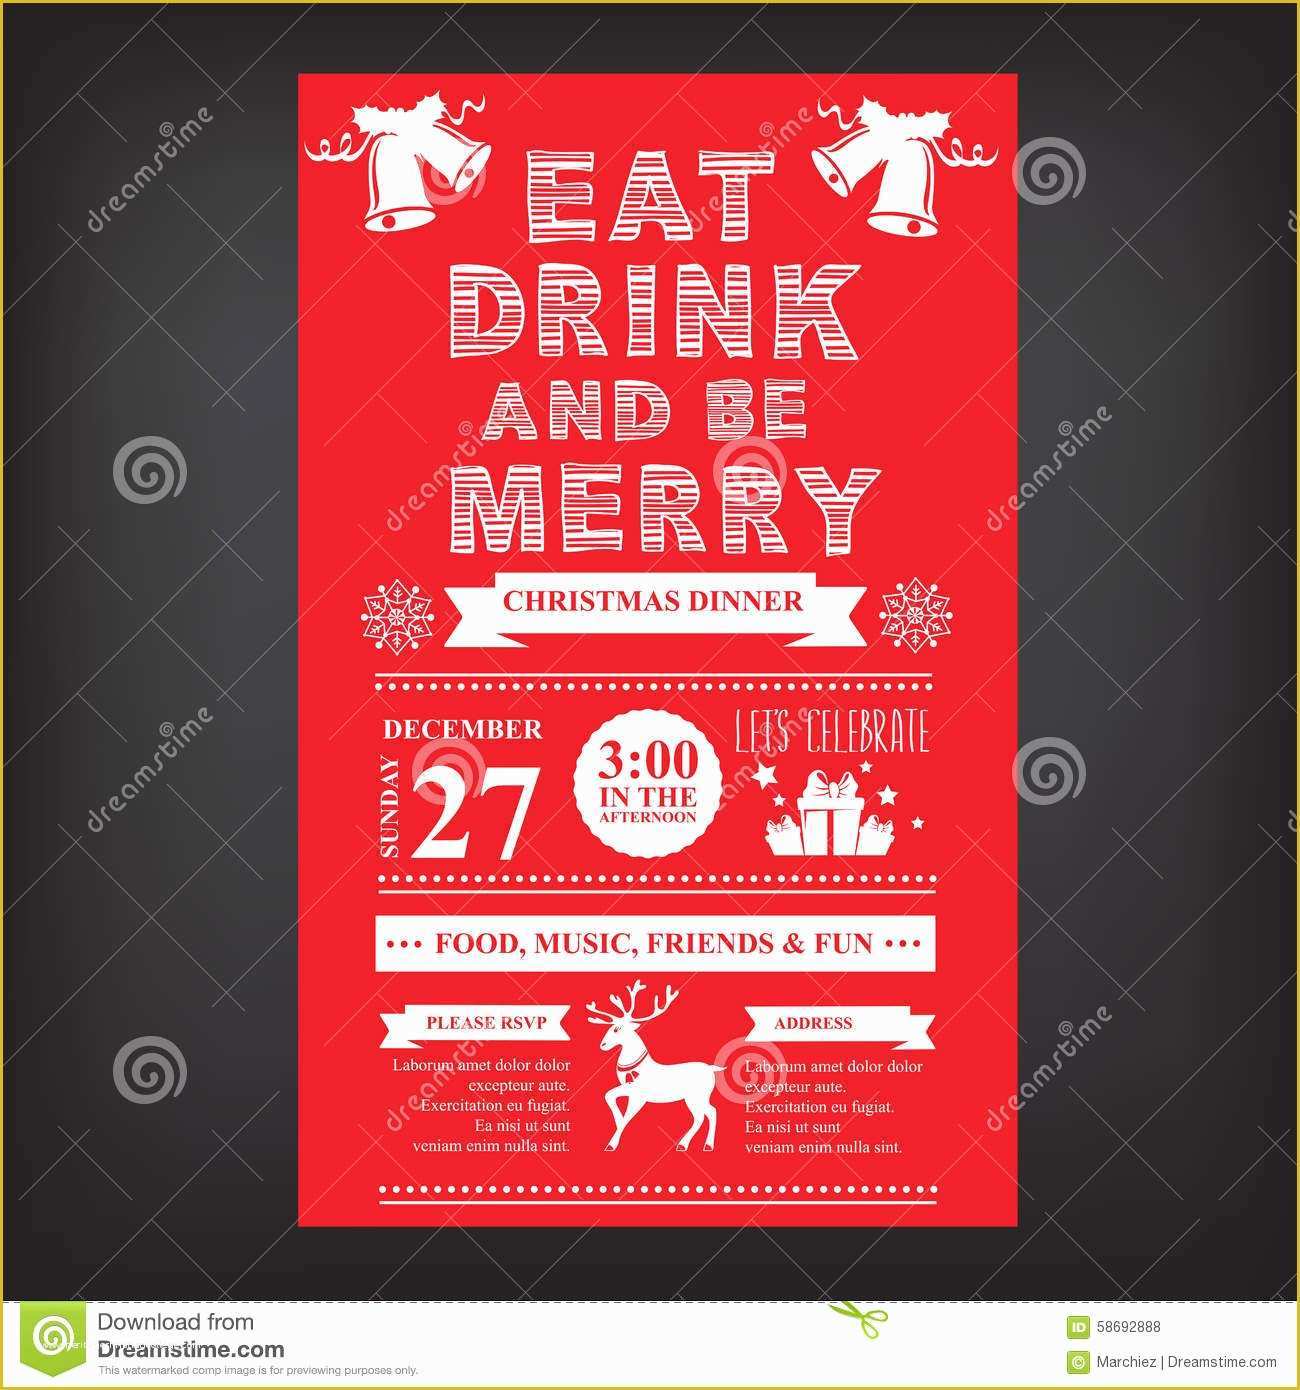 Dinner Menu Template Free Download Of Christmas Restaurant and Party Menu Invitation Stock